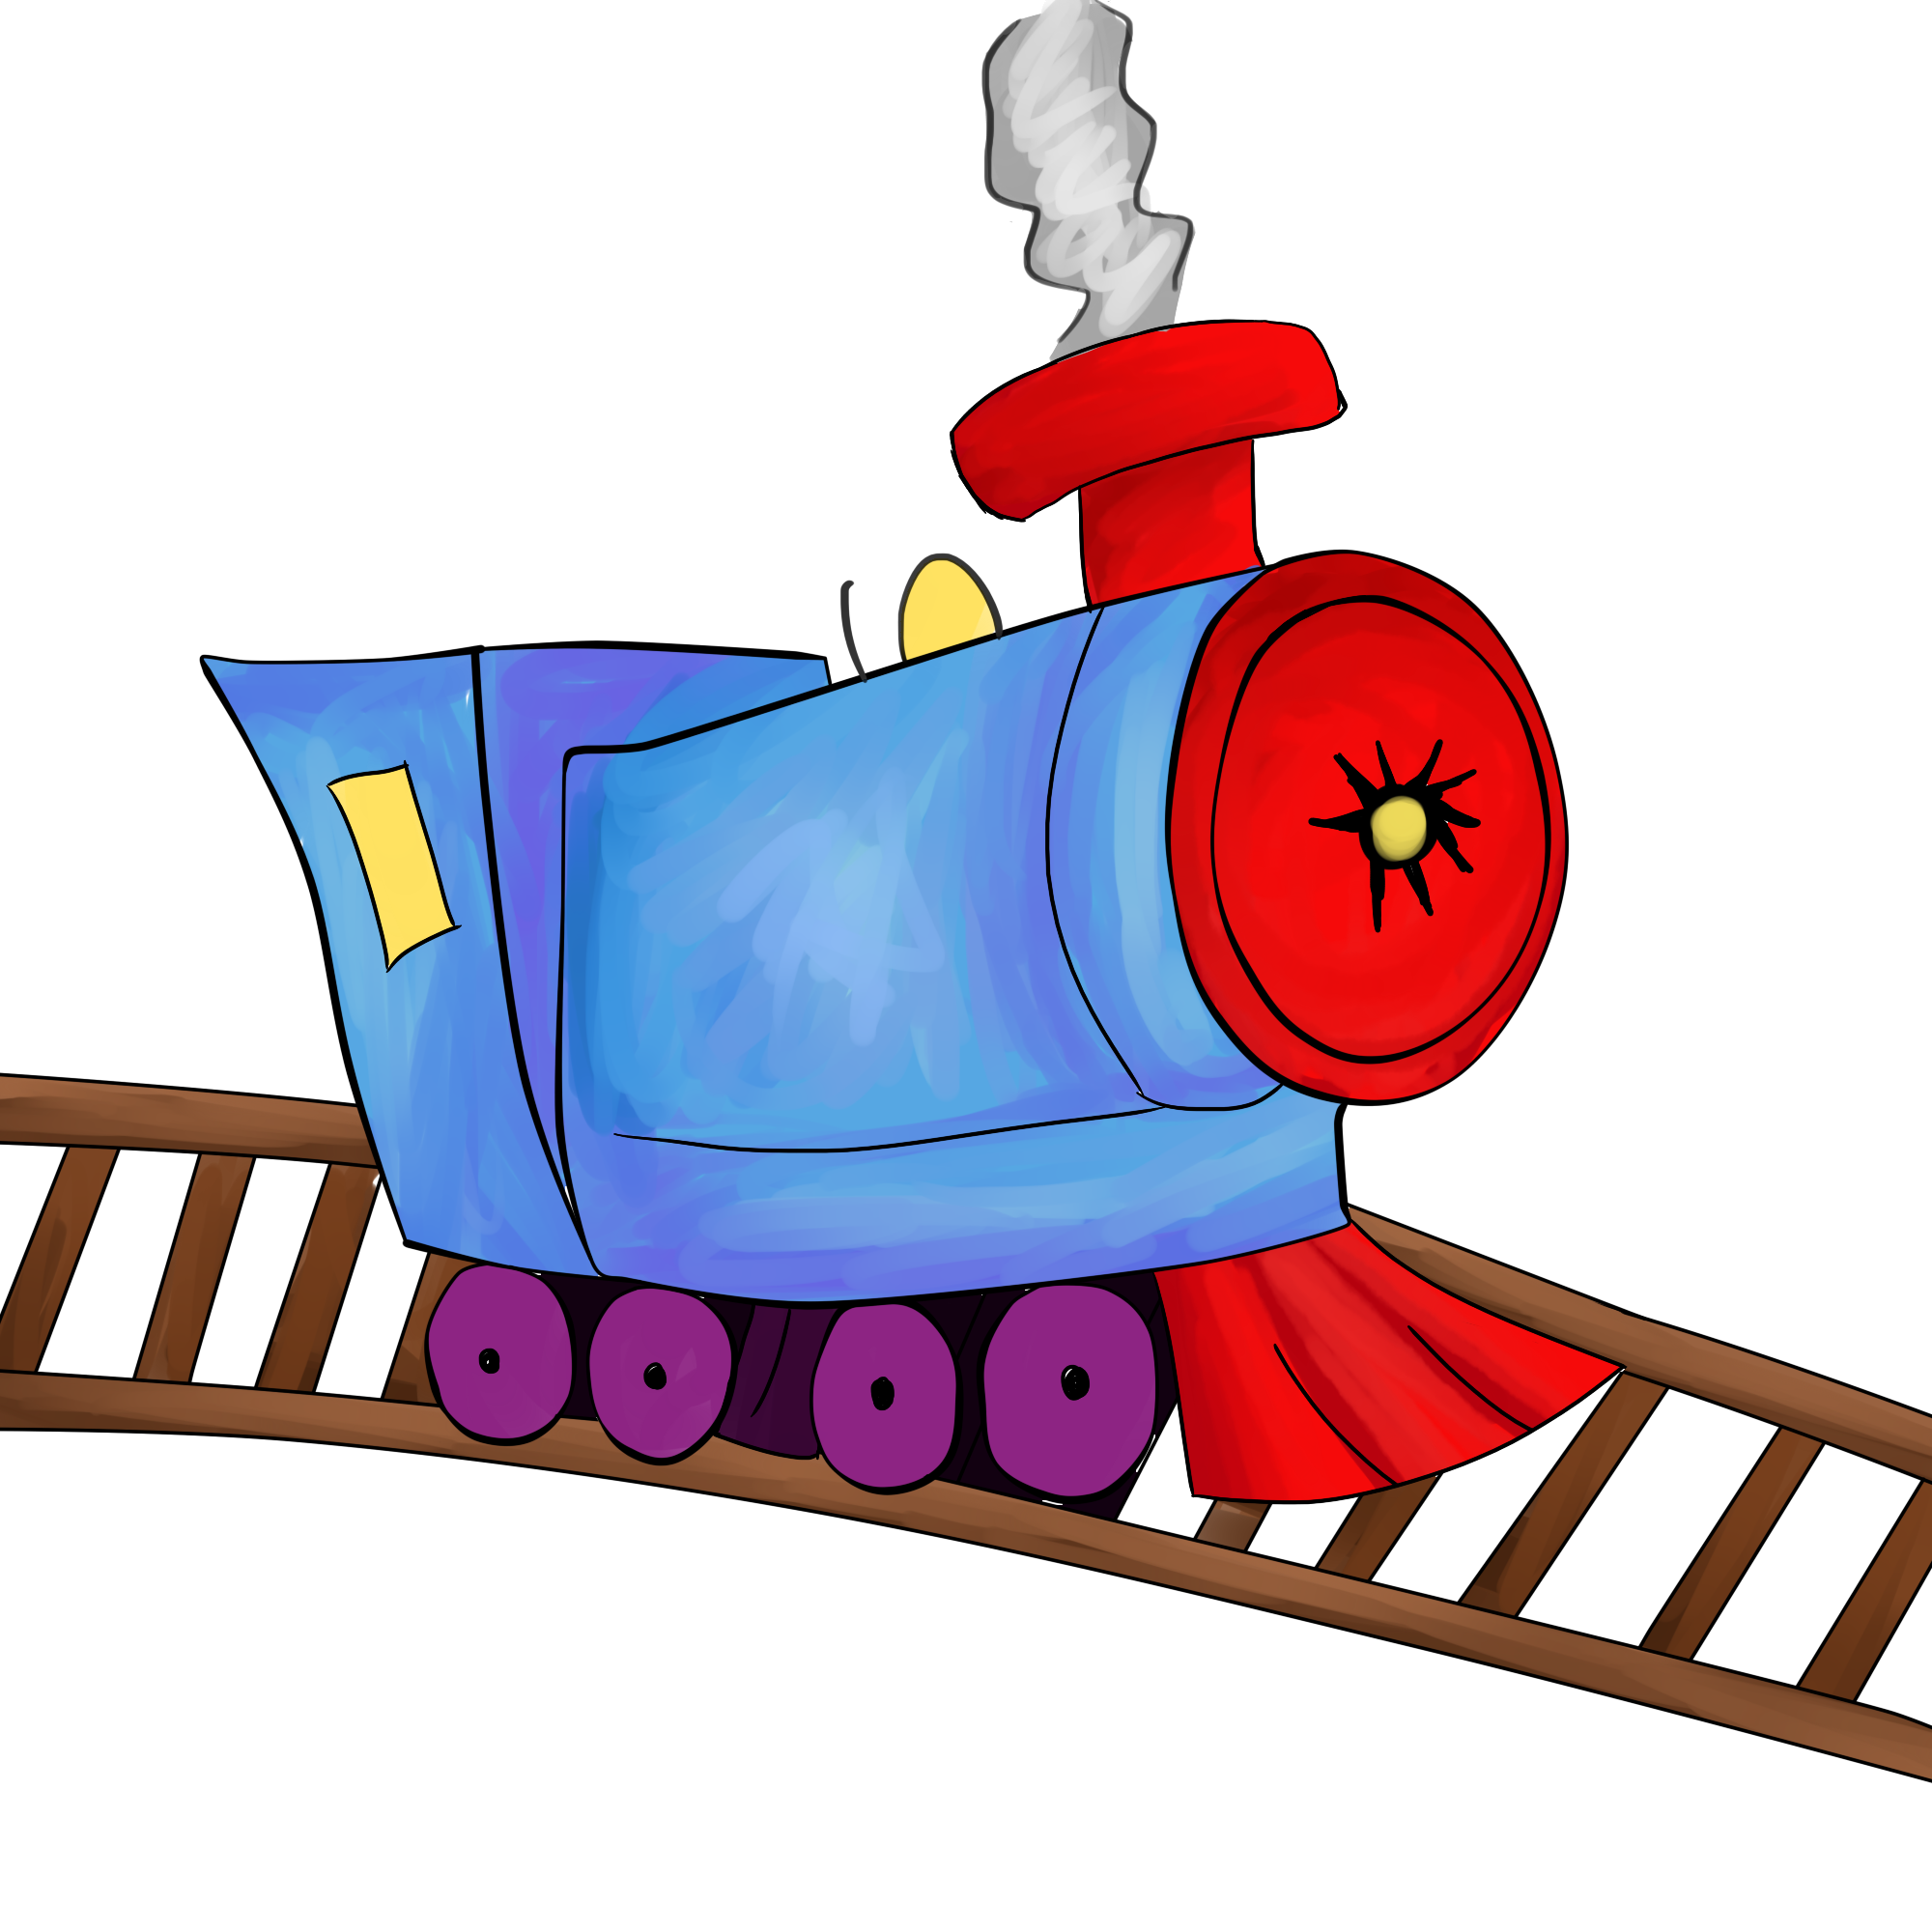 Cartoon Images Of Trains Clipart Best